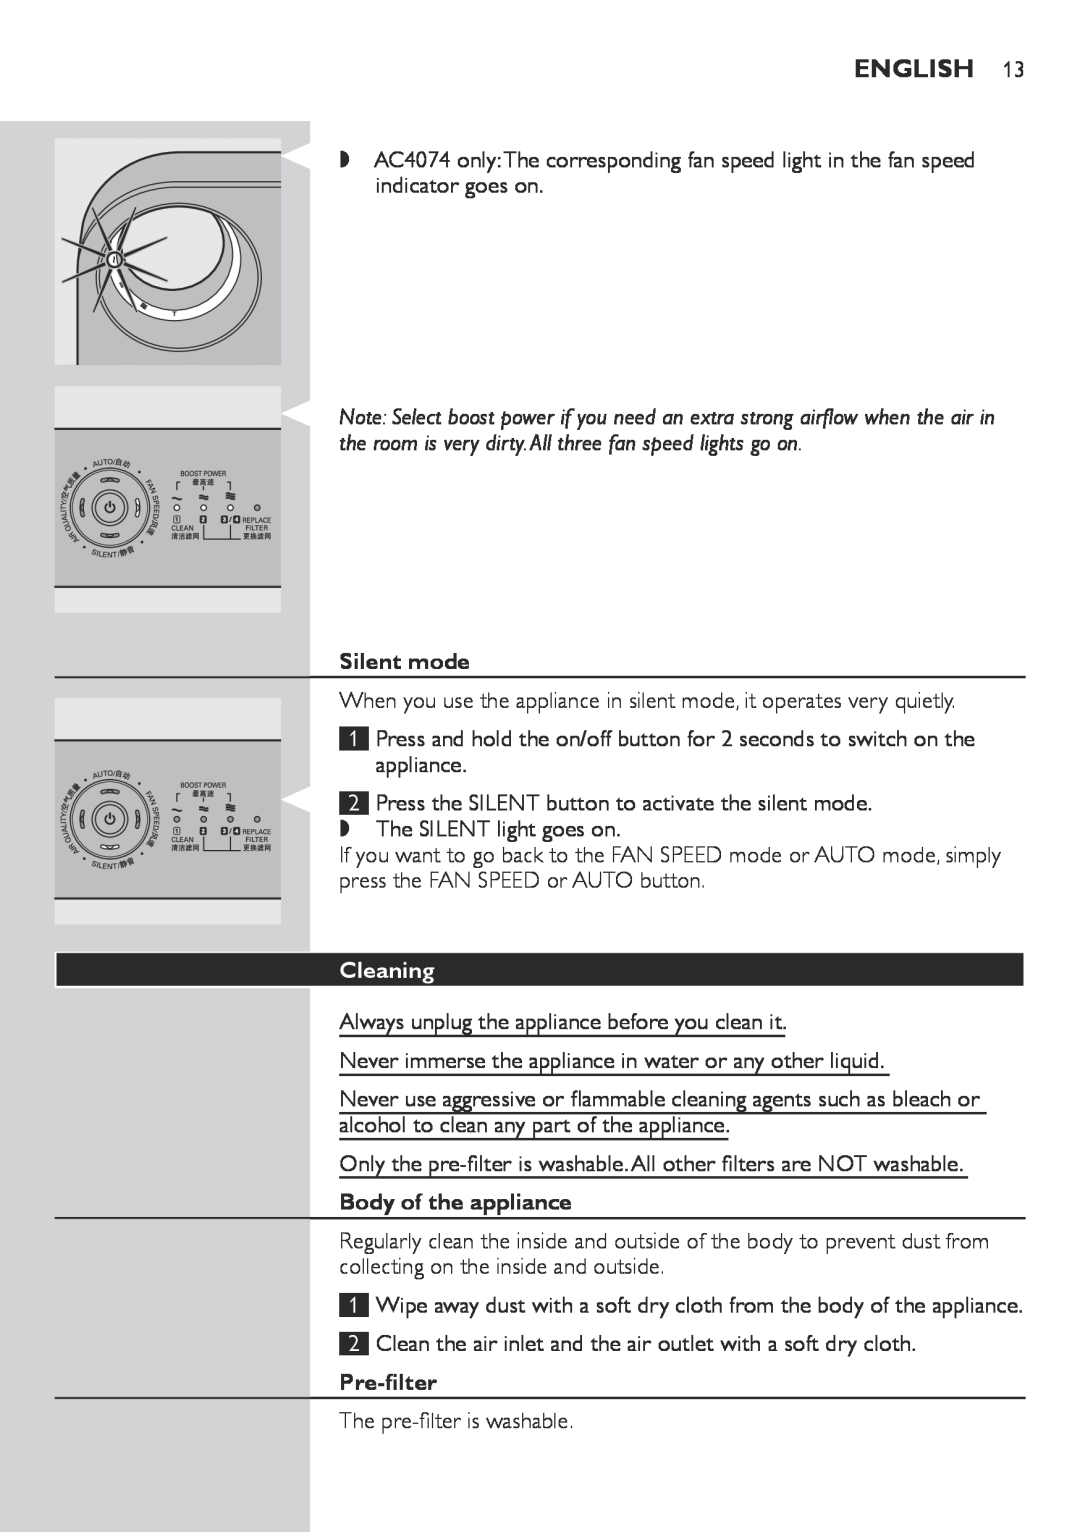 Philips AC4074, AC4072 user manual English, Silent mode, Cleaning, Body of the appliance, Pre-filter 